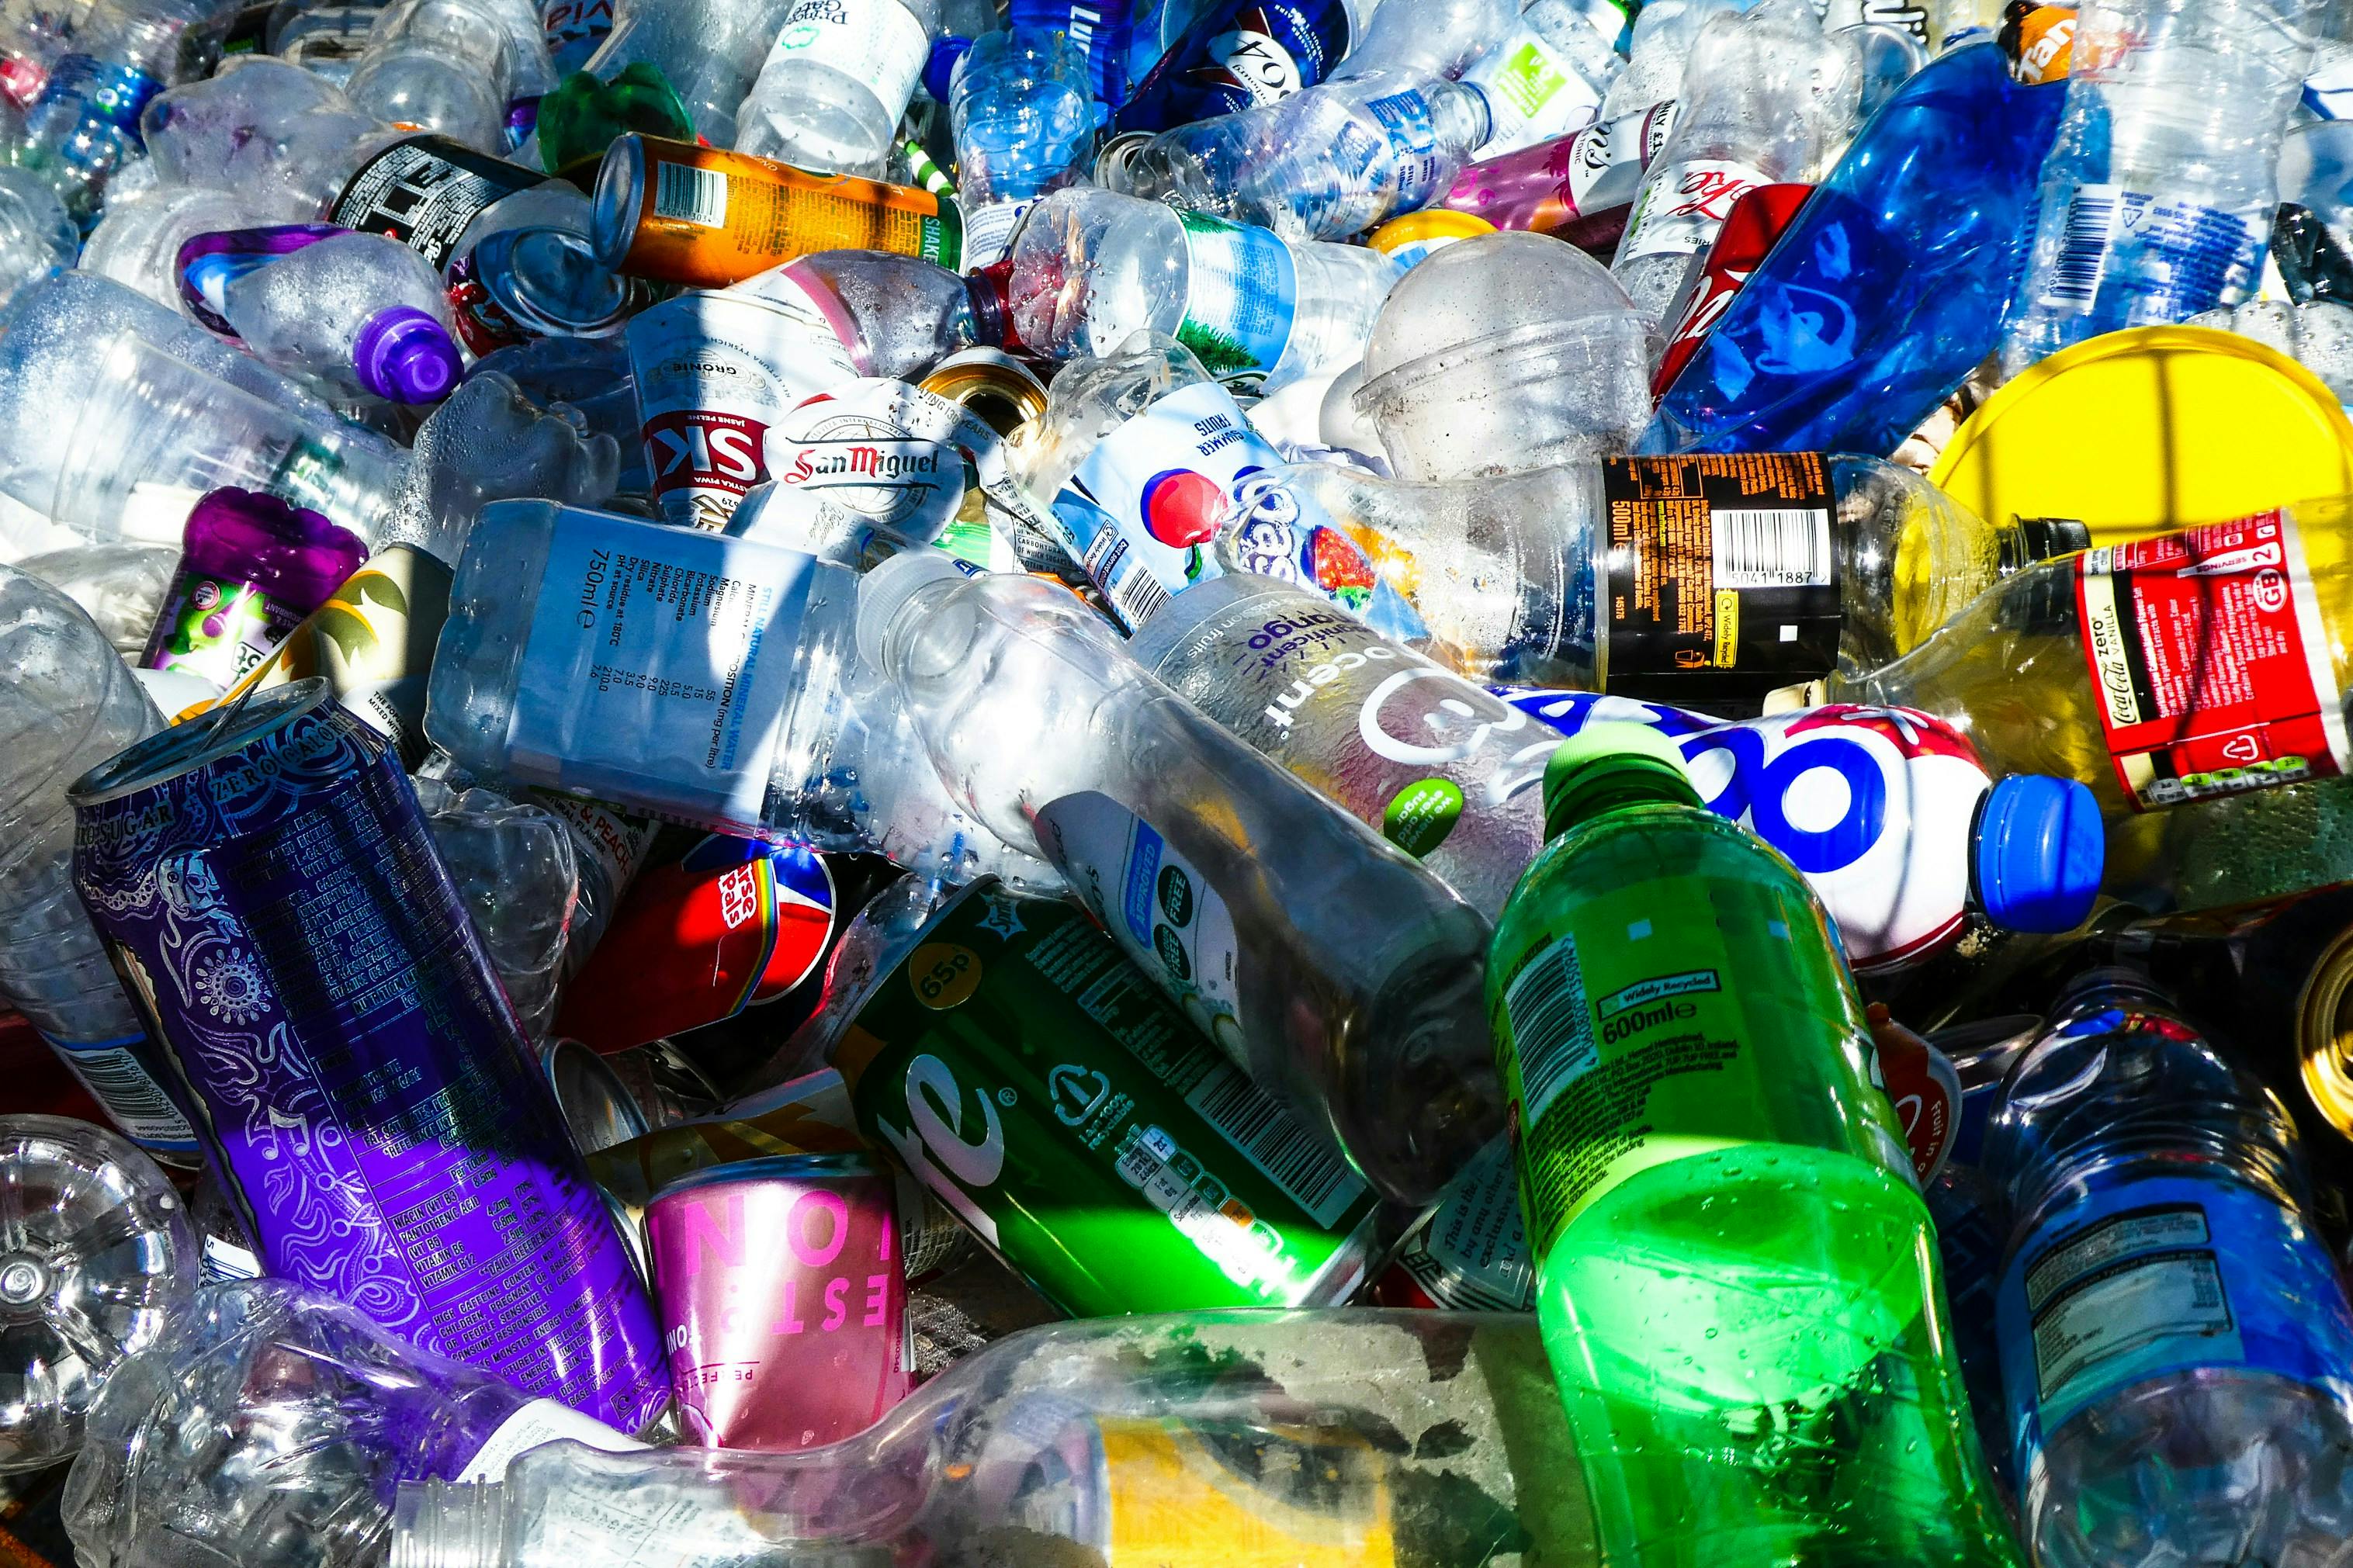 A large pile of plastic bottles and cans showcasing australia's packaging and waste problem.